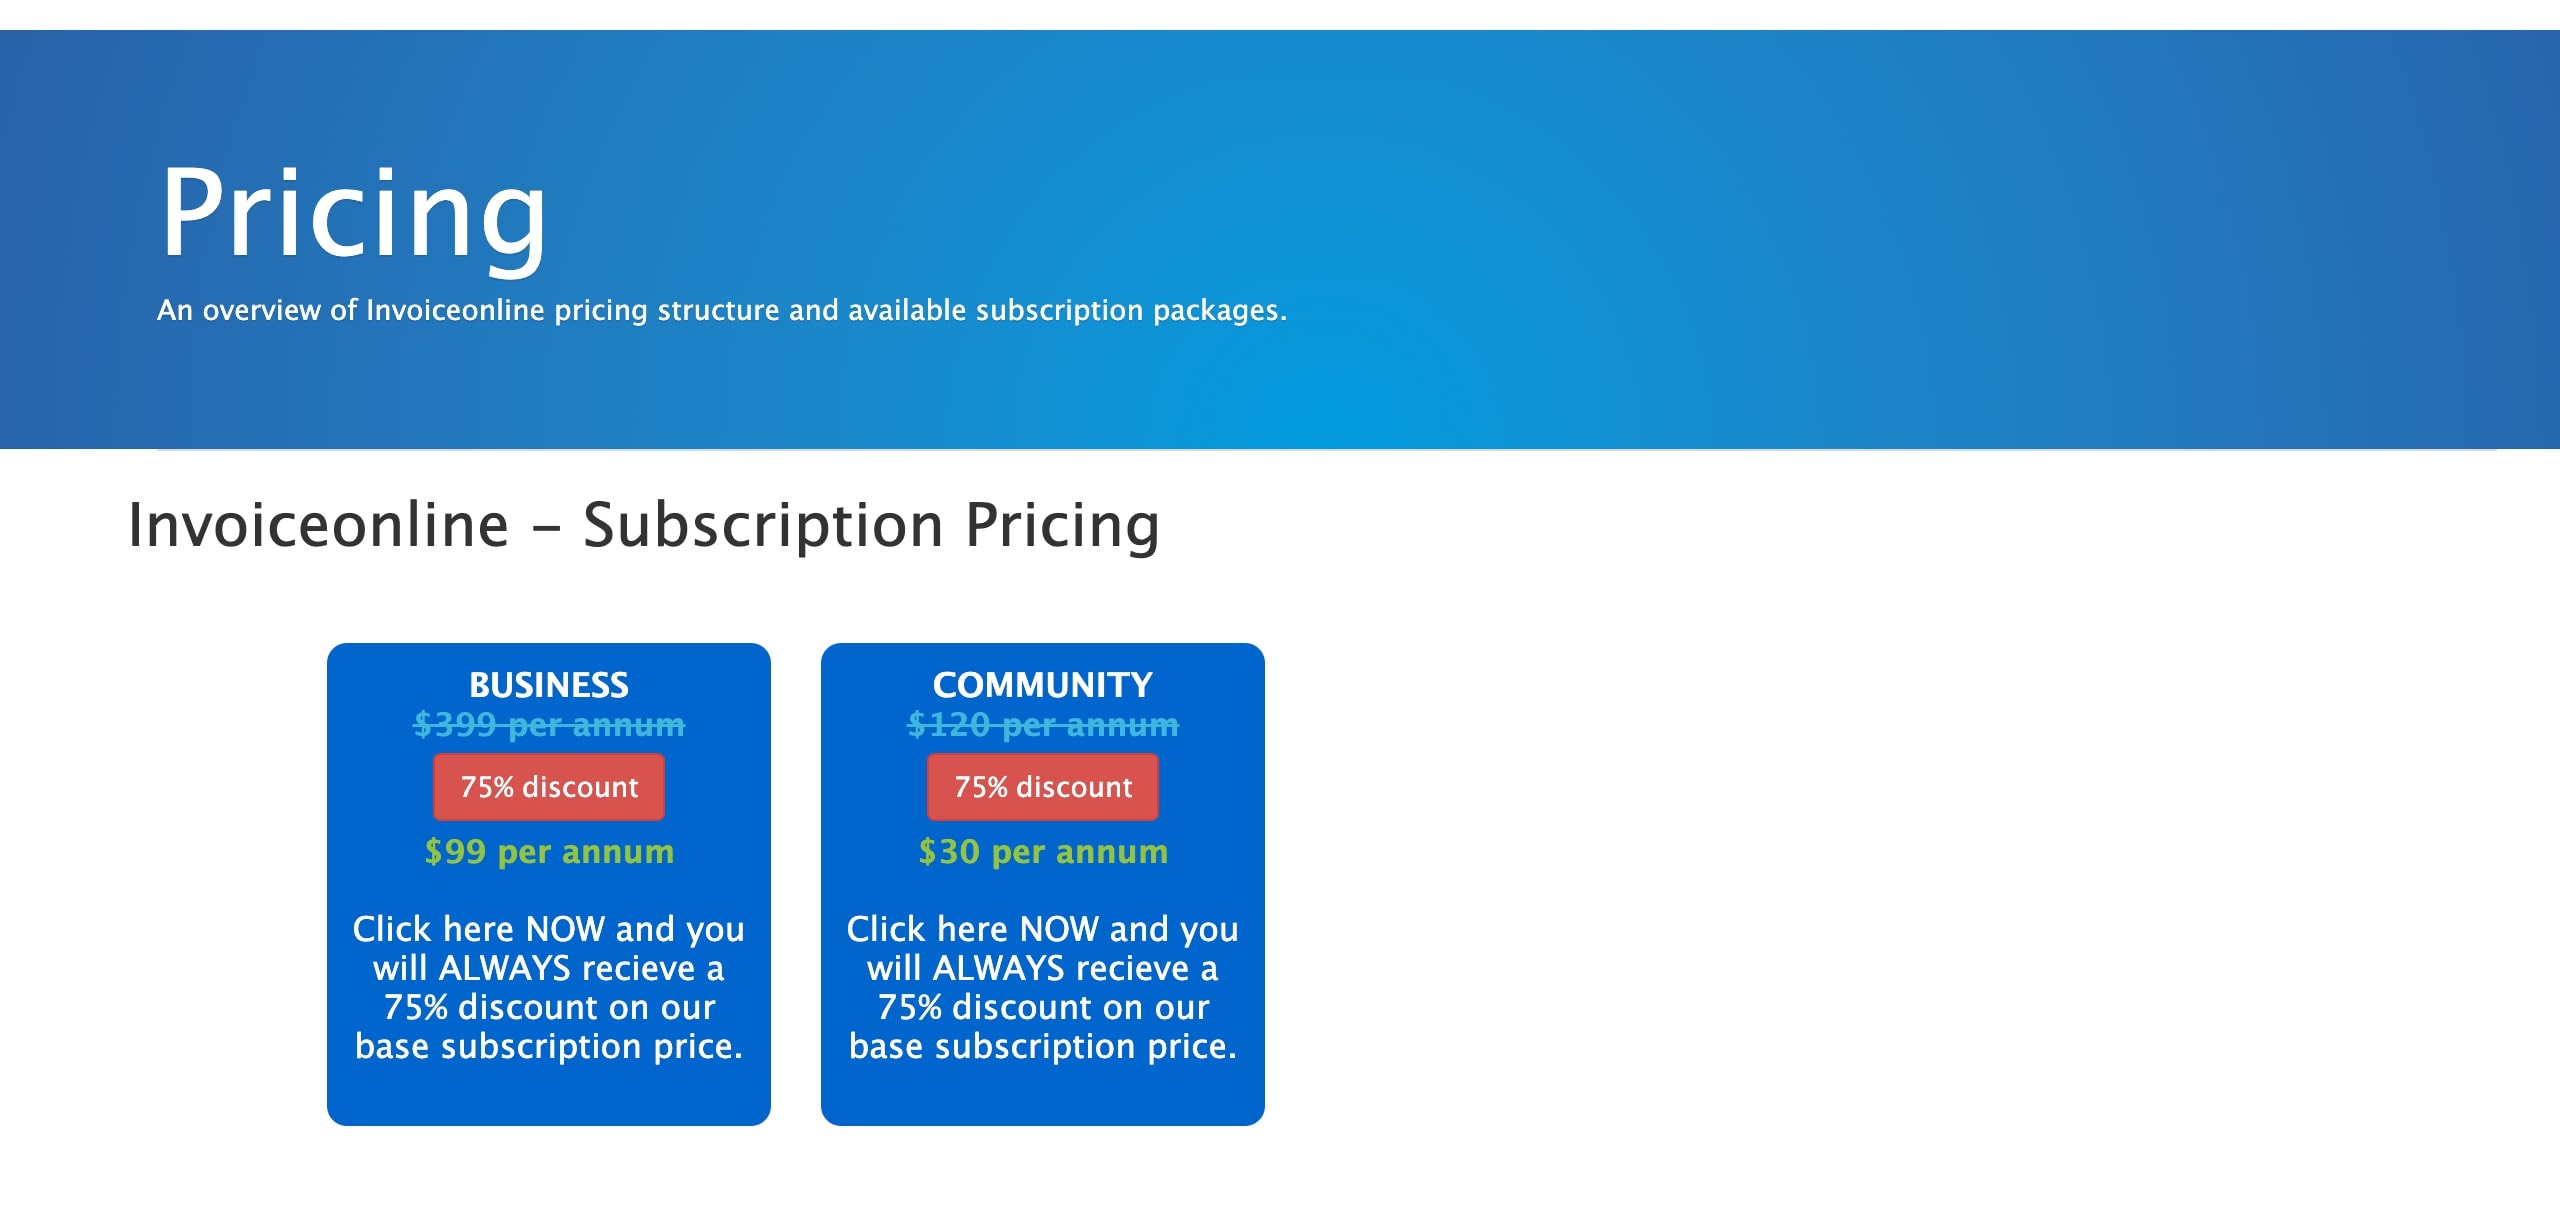 Invoiceonline pricing